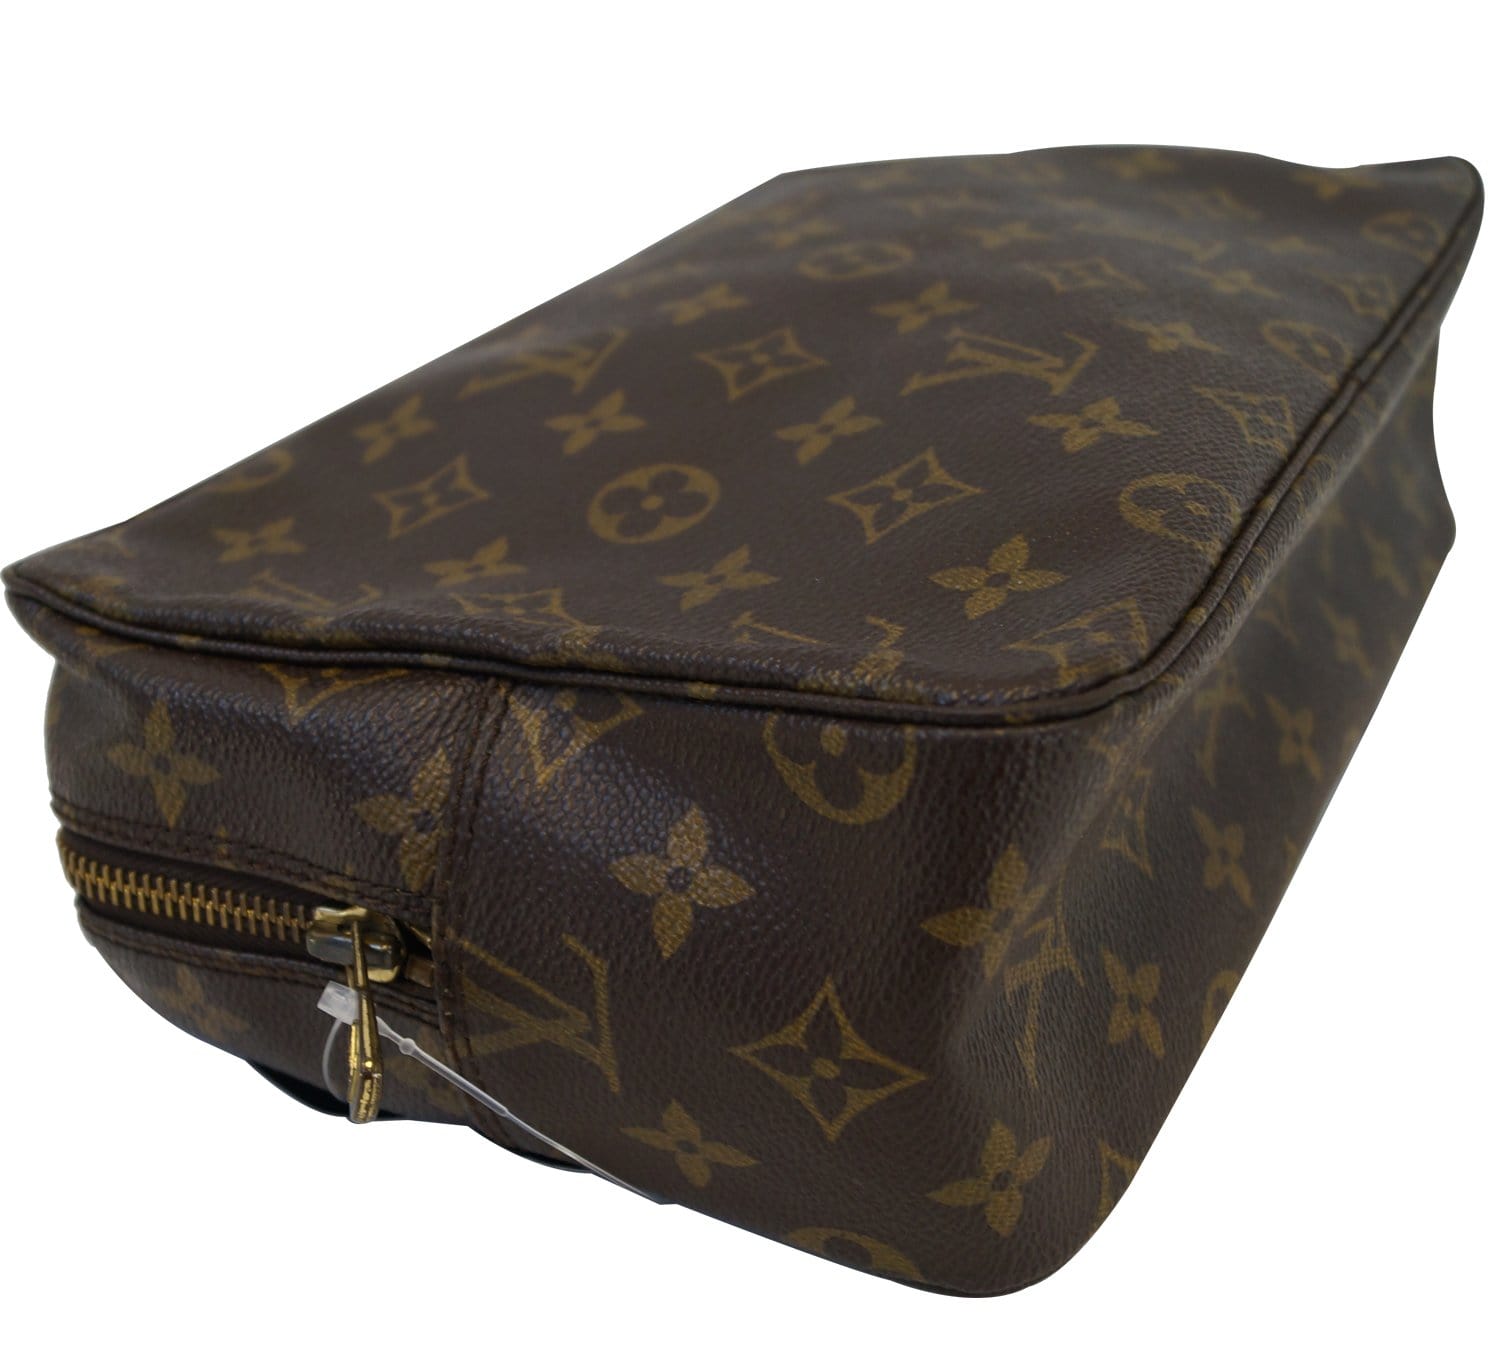 Rank AB ｜ LV Truth Toilet 28 Monogram Makeup Pouch｜23071510 – BRAND GET